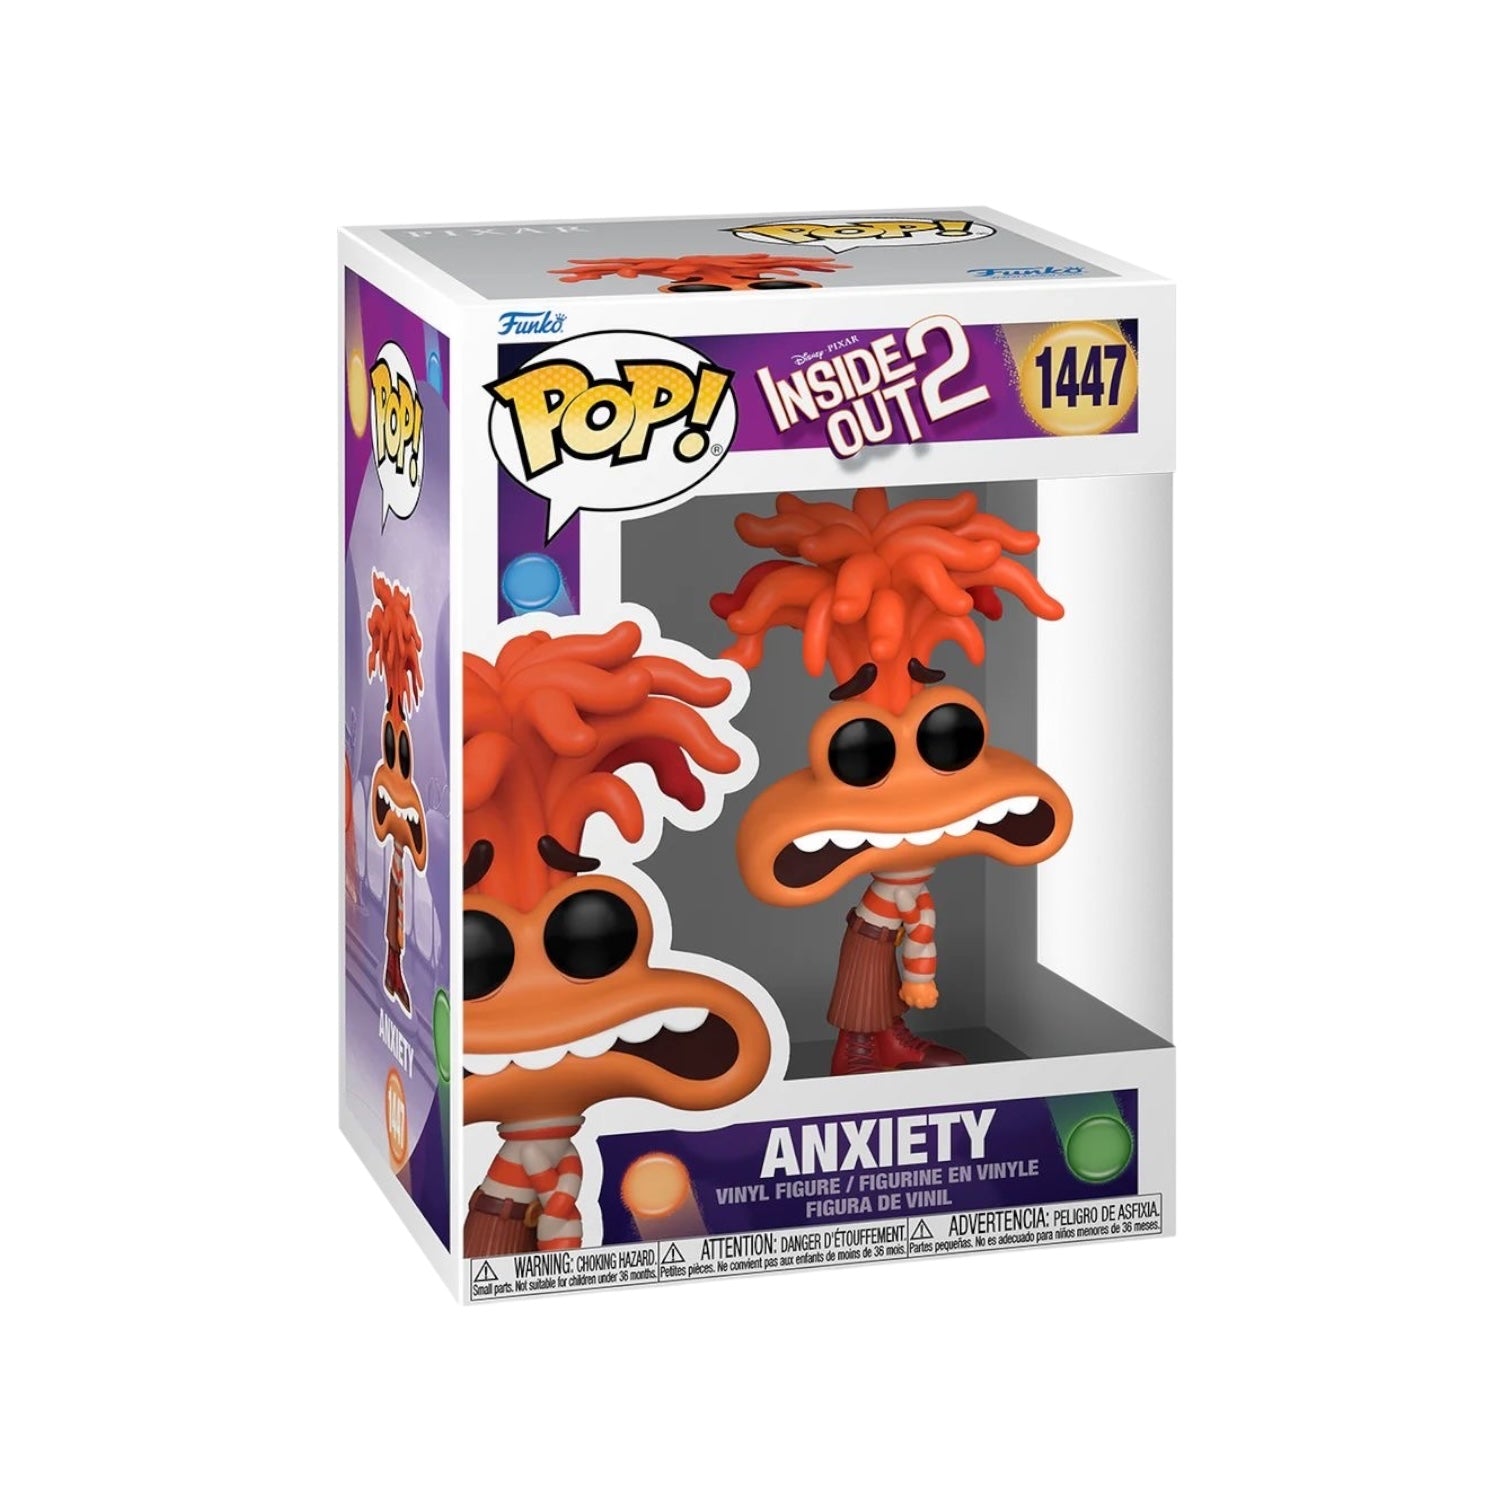 Anxiety #1447 Funko Pop! - Inside Out 2 - PREORDER